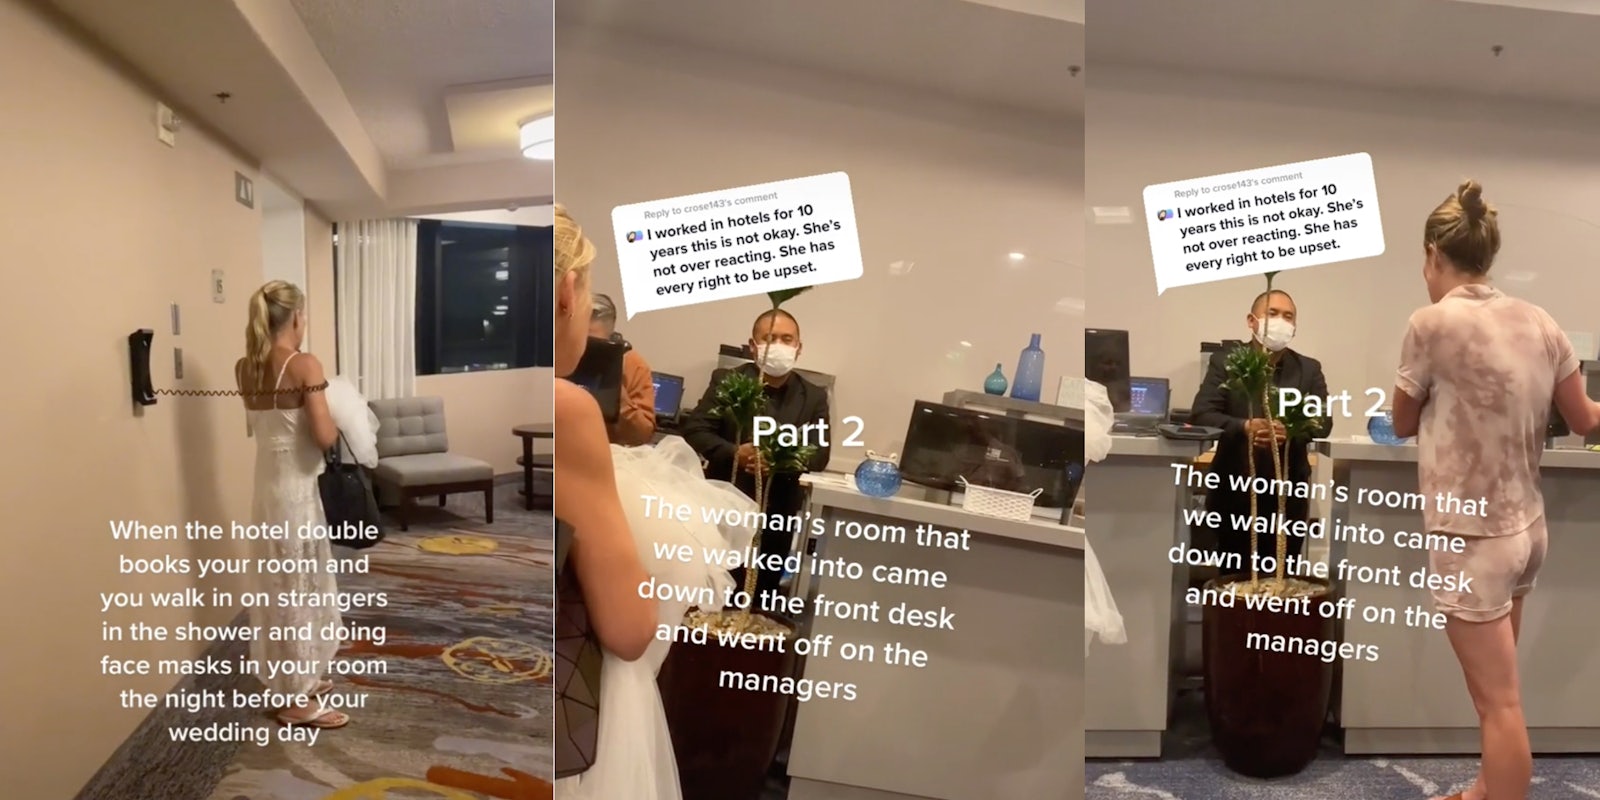 woman-accidentally-walks-in-on-strangers-after-hotel-double-books-room-in-viral-tiktok